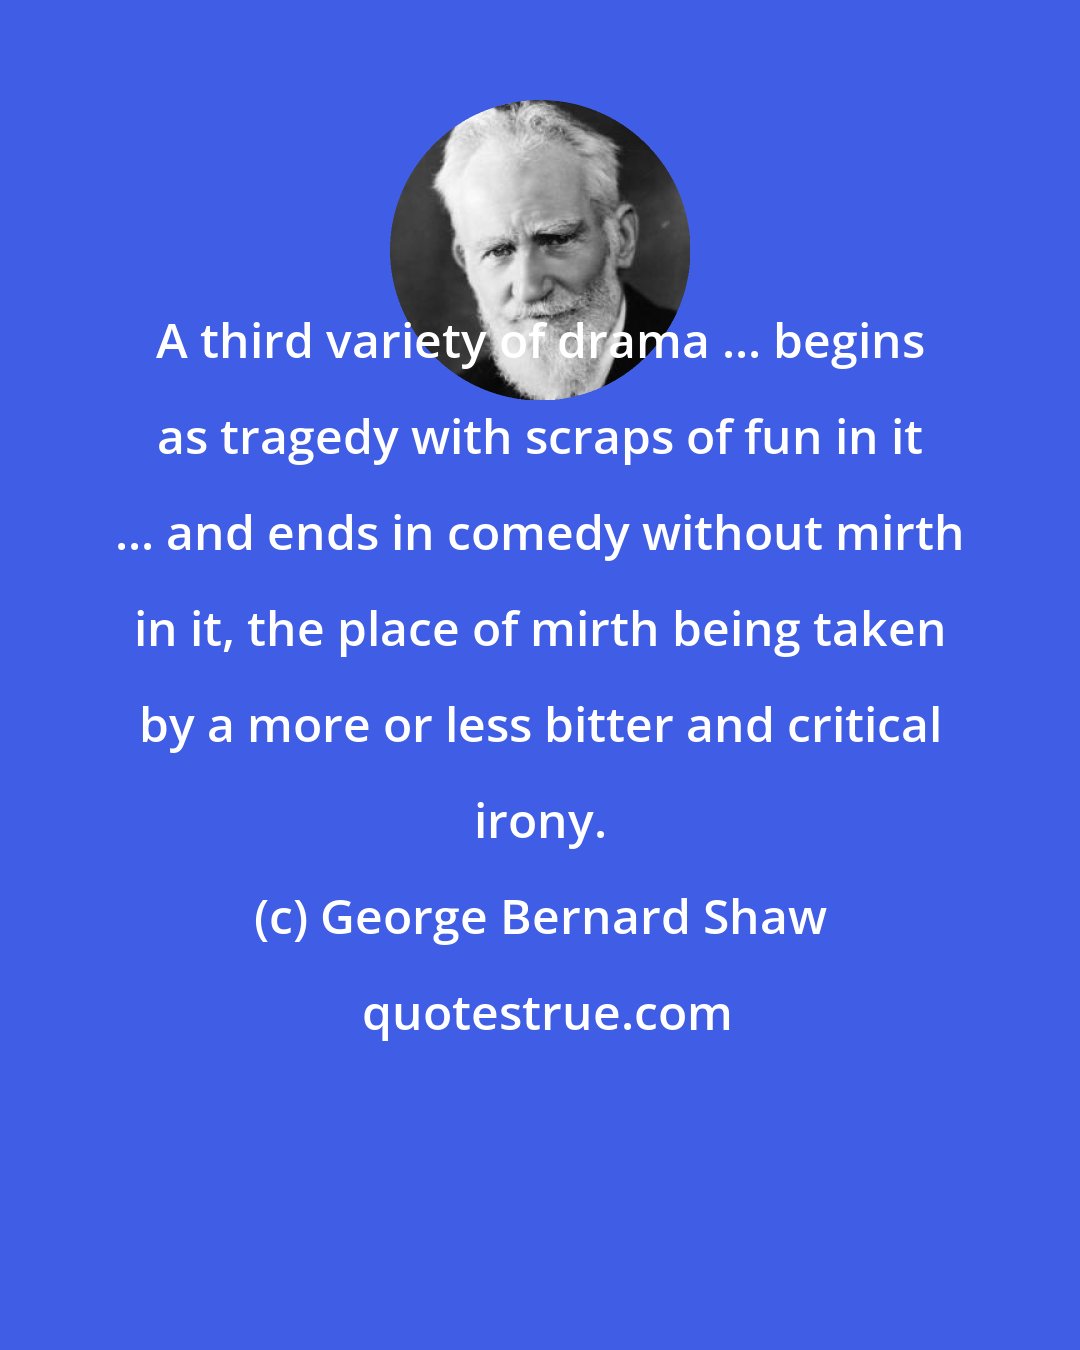 George Bernard Shaw: A third variety of drama ... begins as tragedy with scraps of fun in it ... and ends in comedy without mirth in it, the place of mirth being taken by a more or less bitter and critical irony.